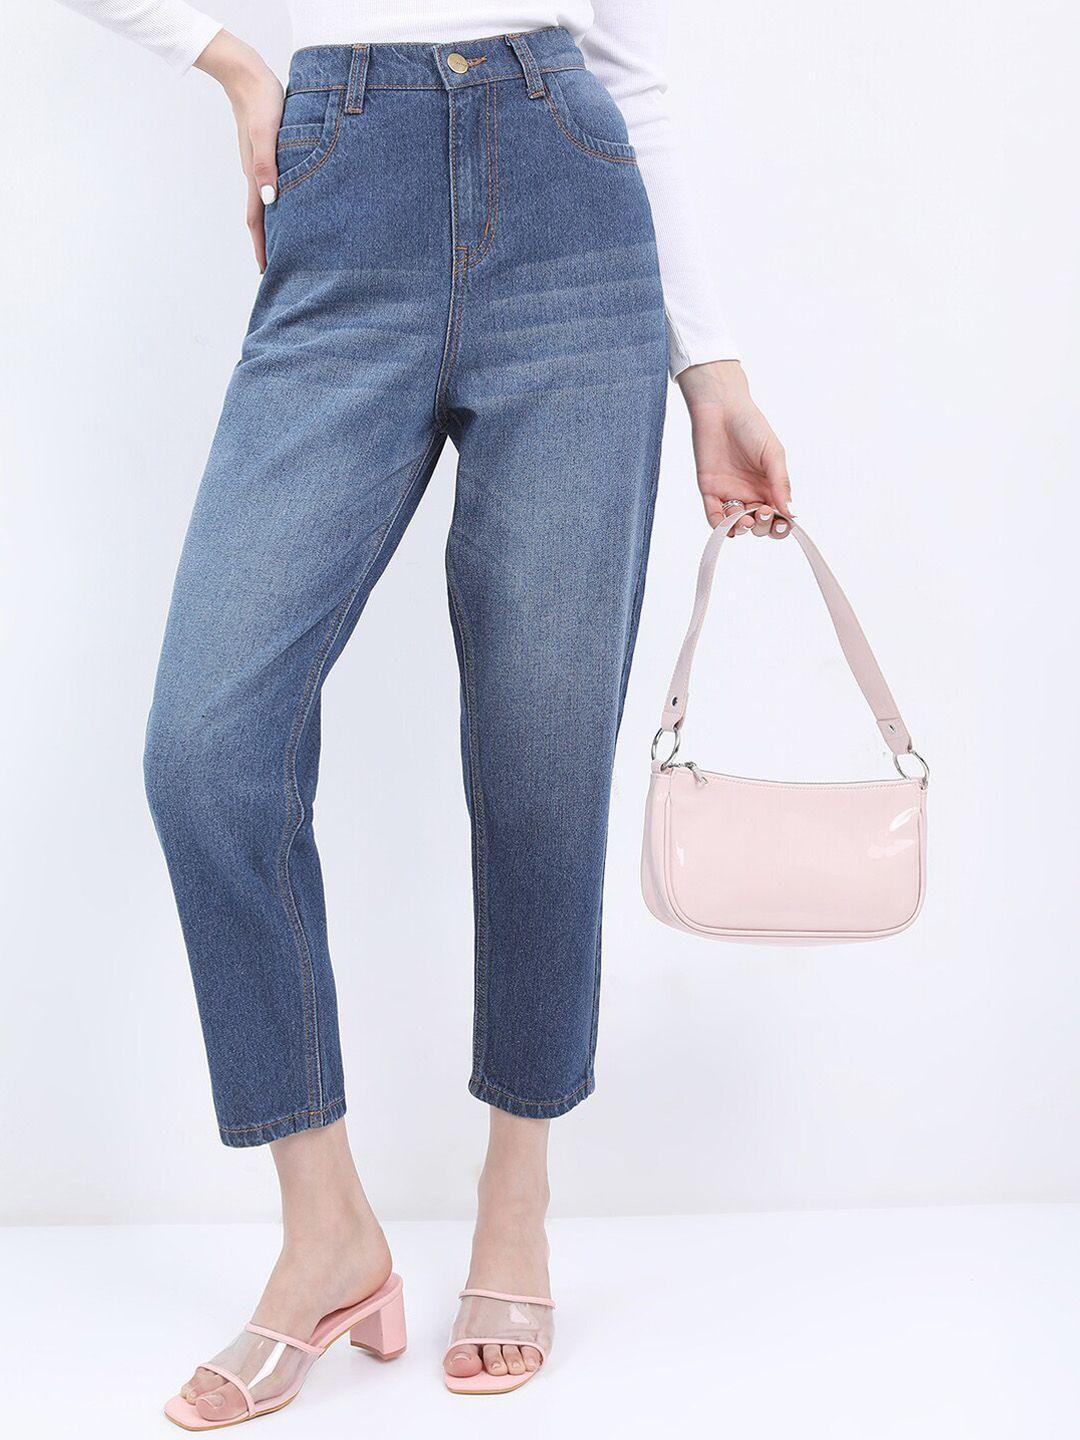 ketch-women-relaxed-fit-high-rise-jeans